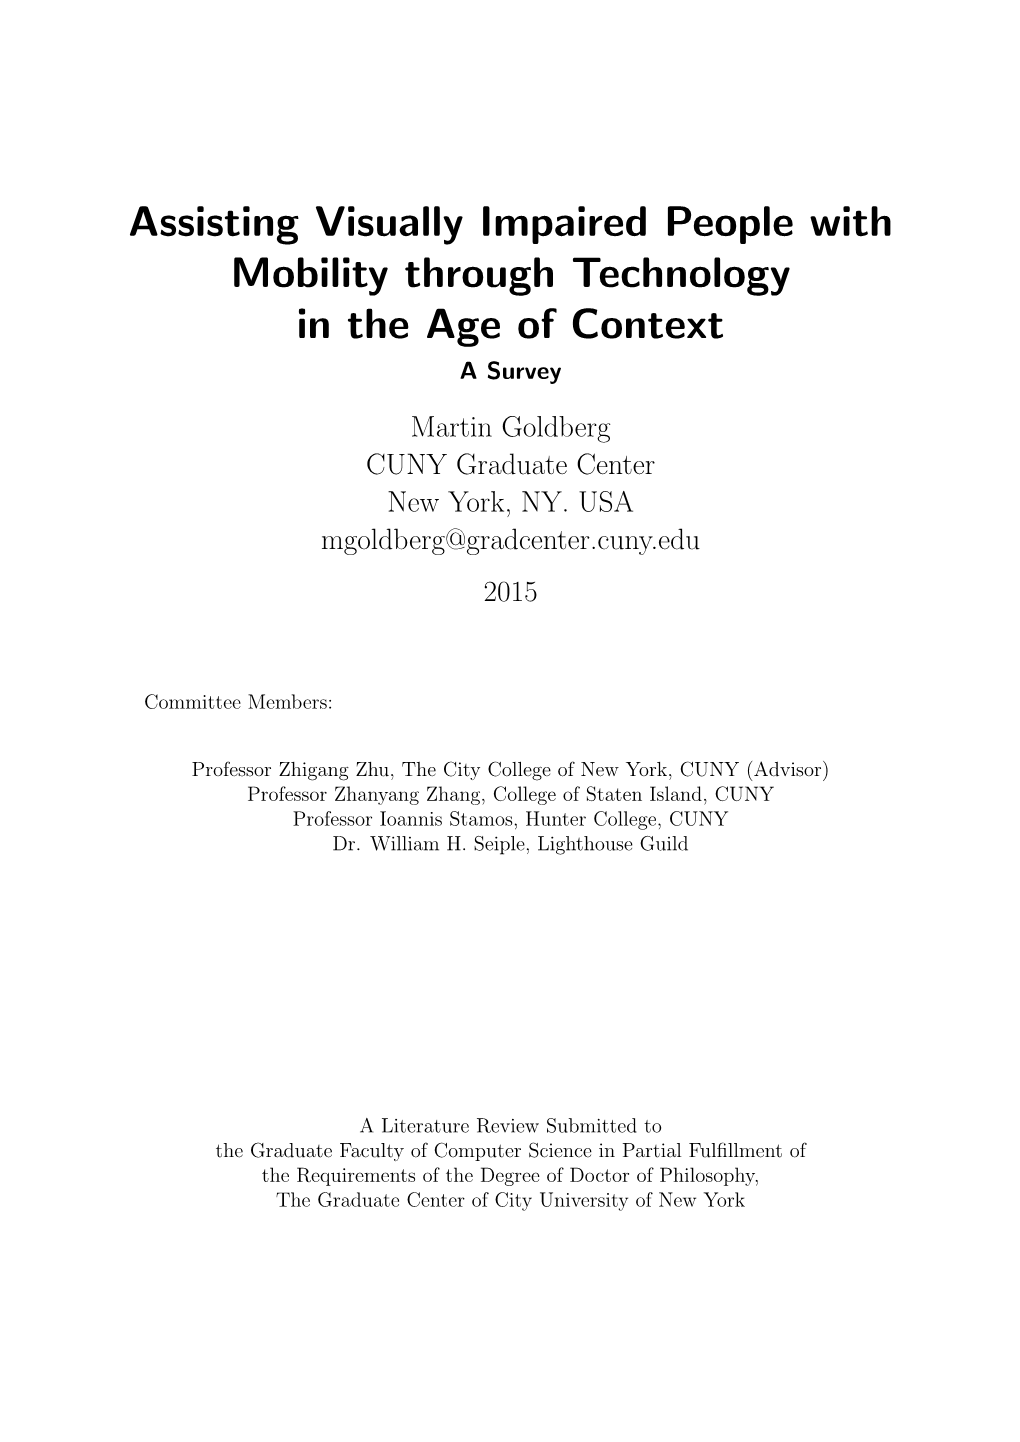 Assisting Visually Impaired People with Mobility Through Technology in the Age of Context a Survey Martin Goldberg CUNY Graduate Center New York, NY